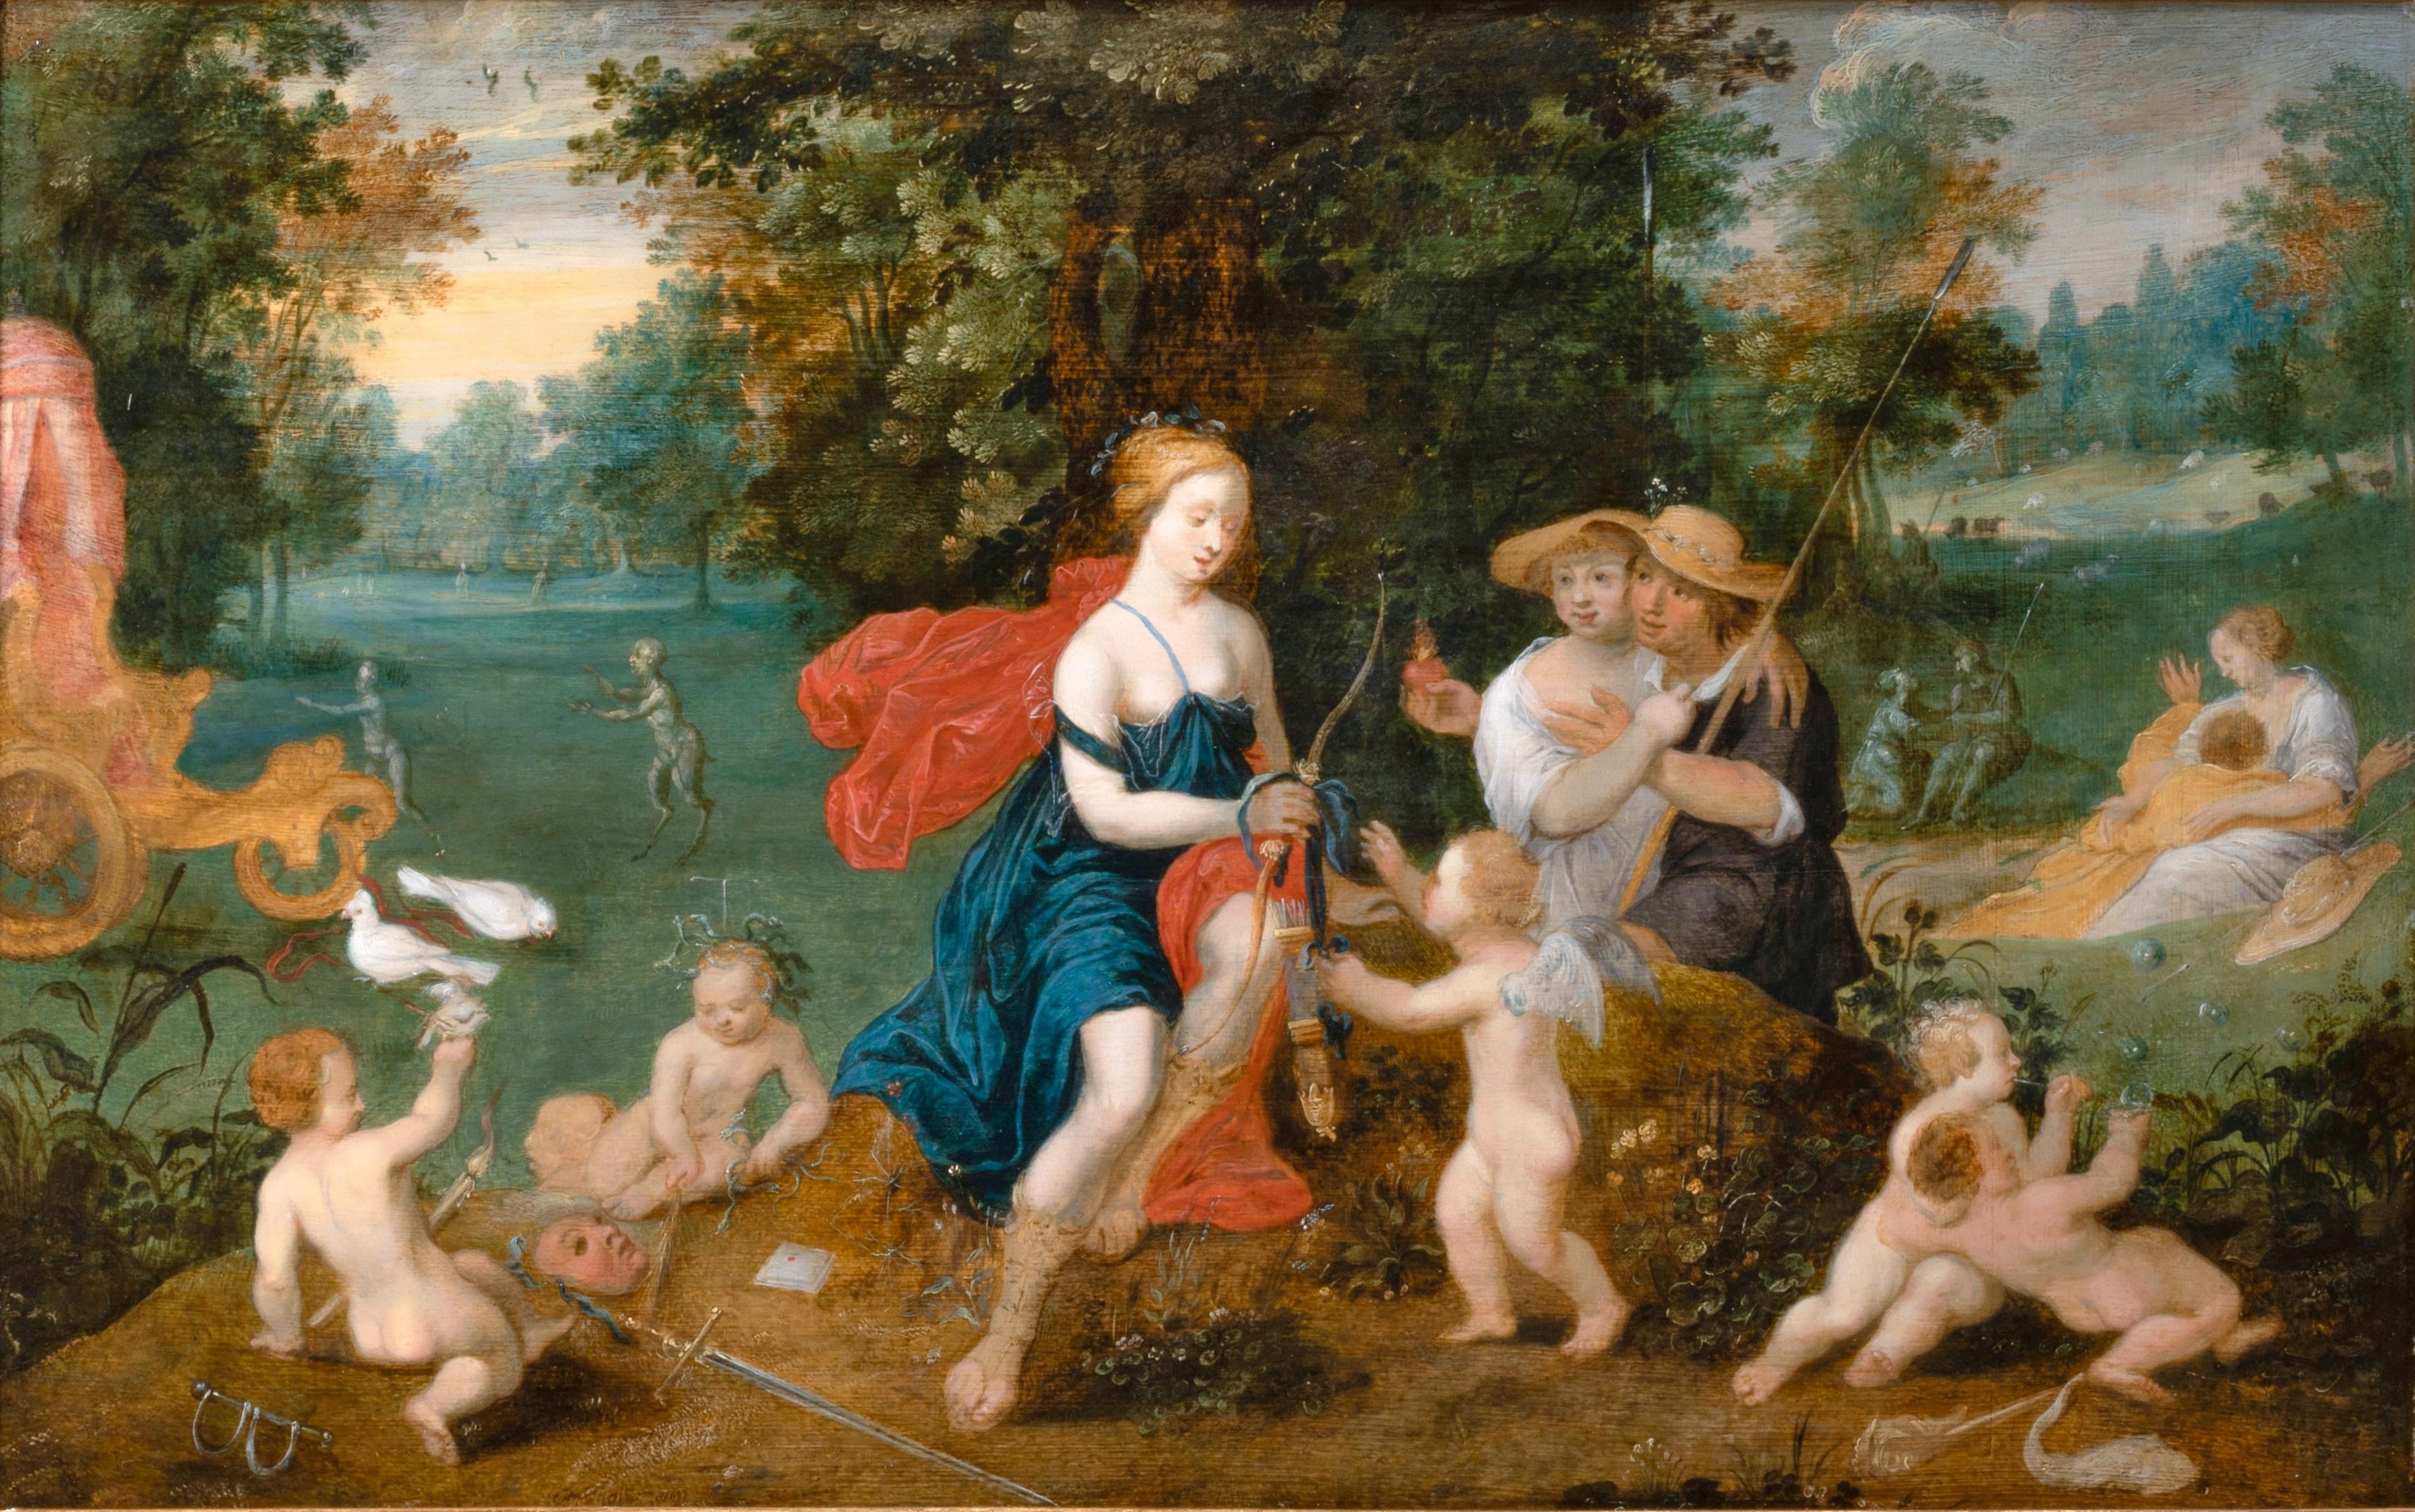 Flemish 17th  c., Allegory of war and peace, circa 1630, by Adriaen van Stalbemt For Sale 1